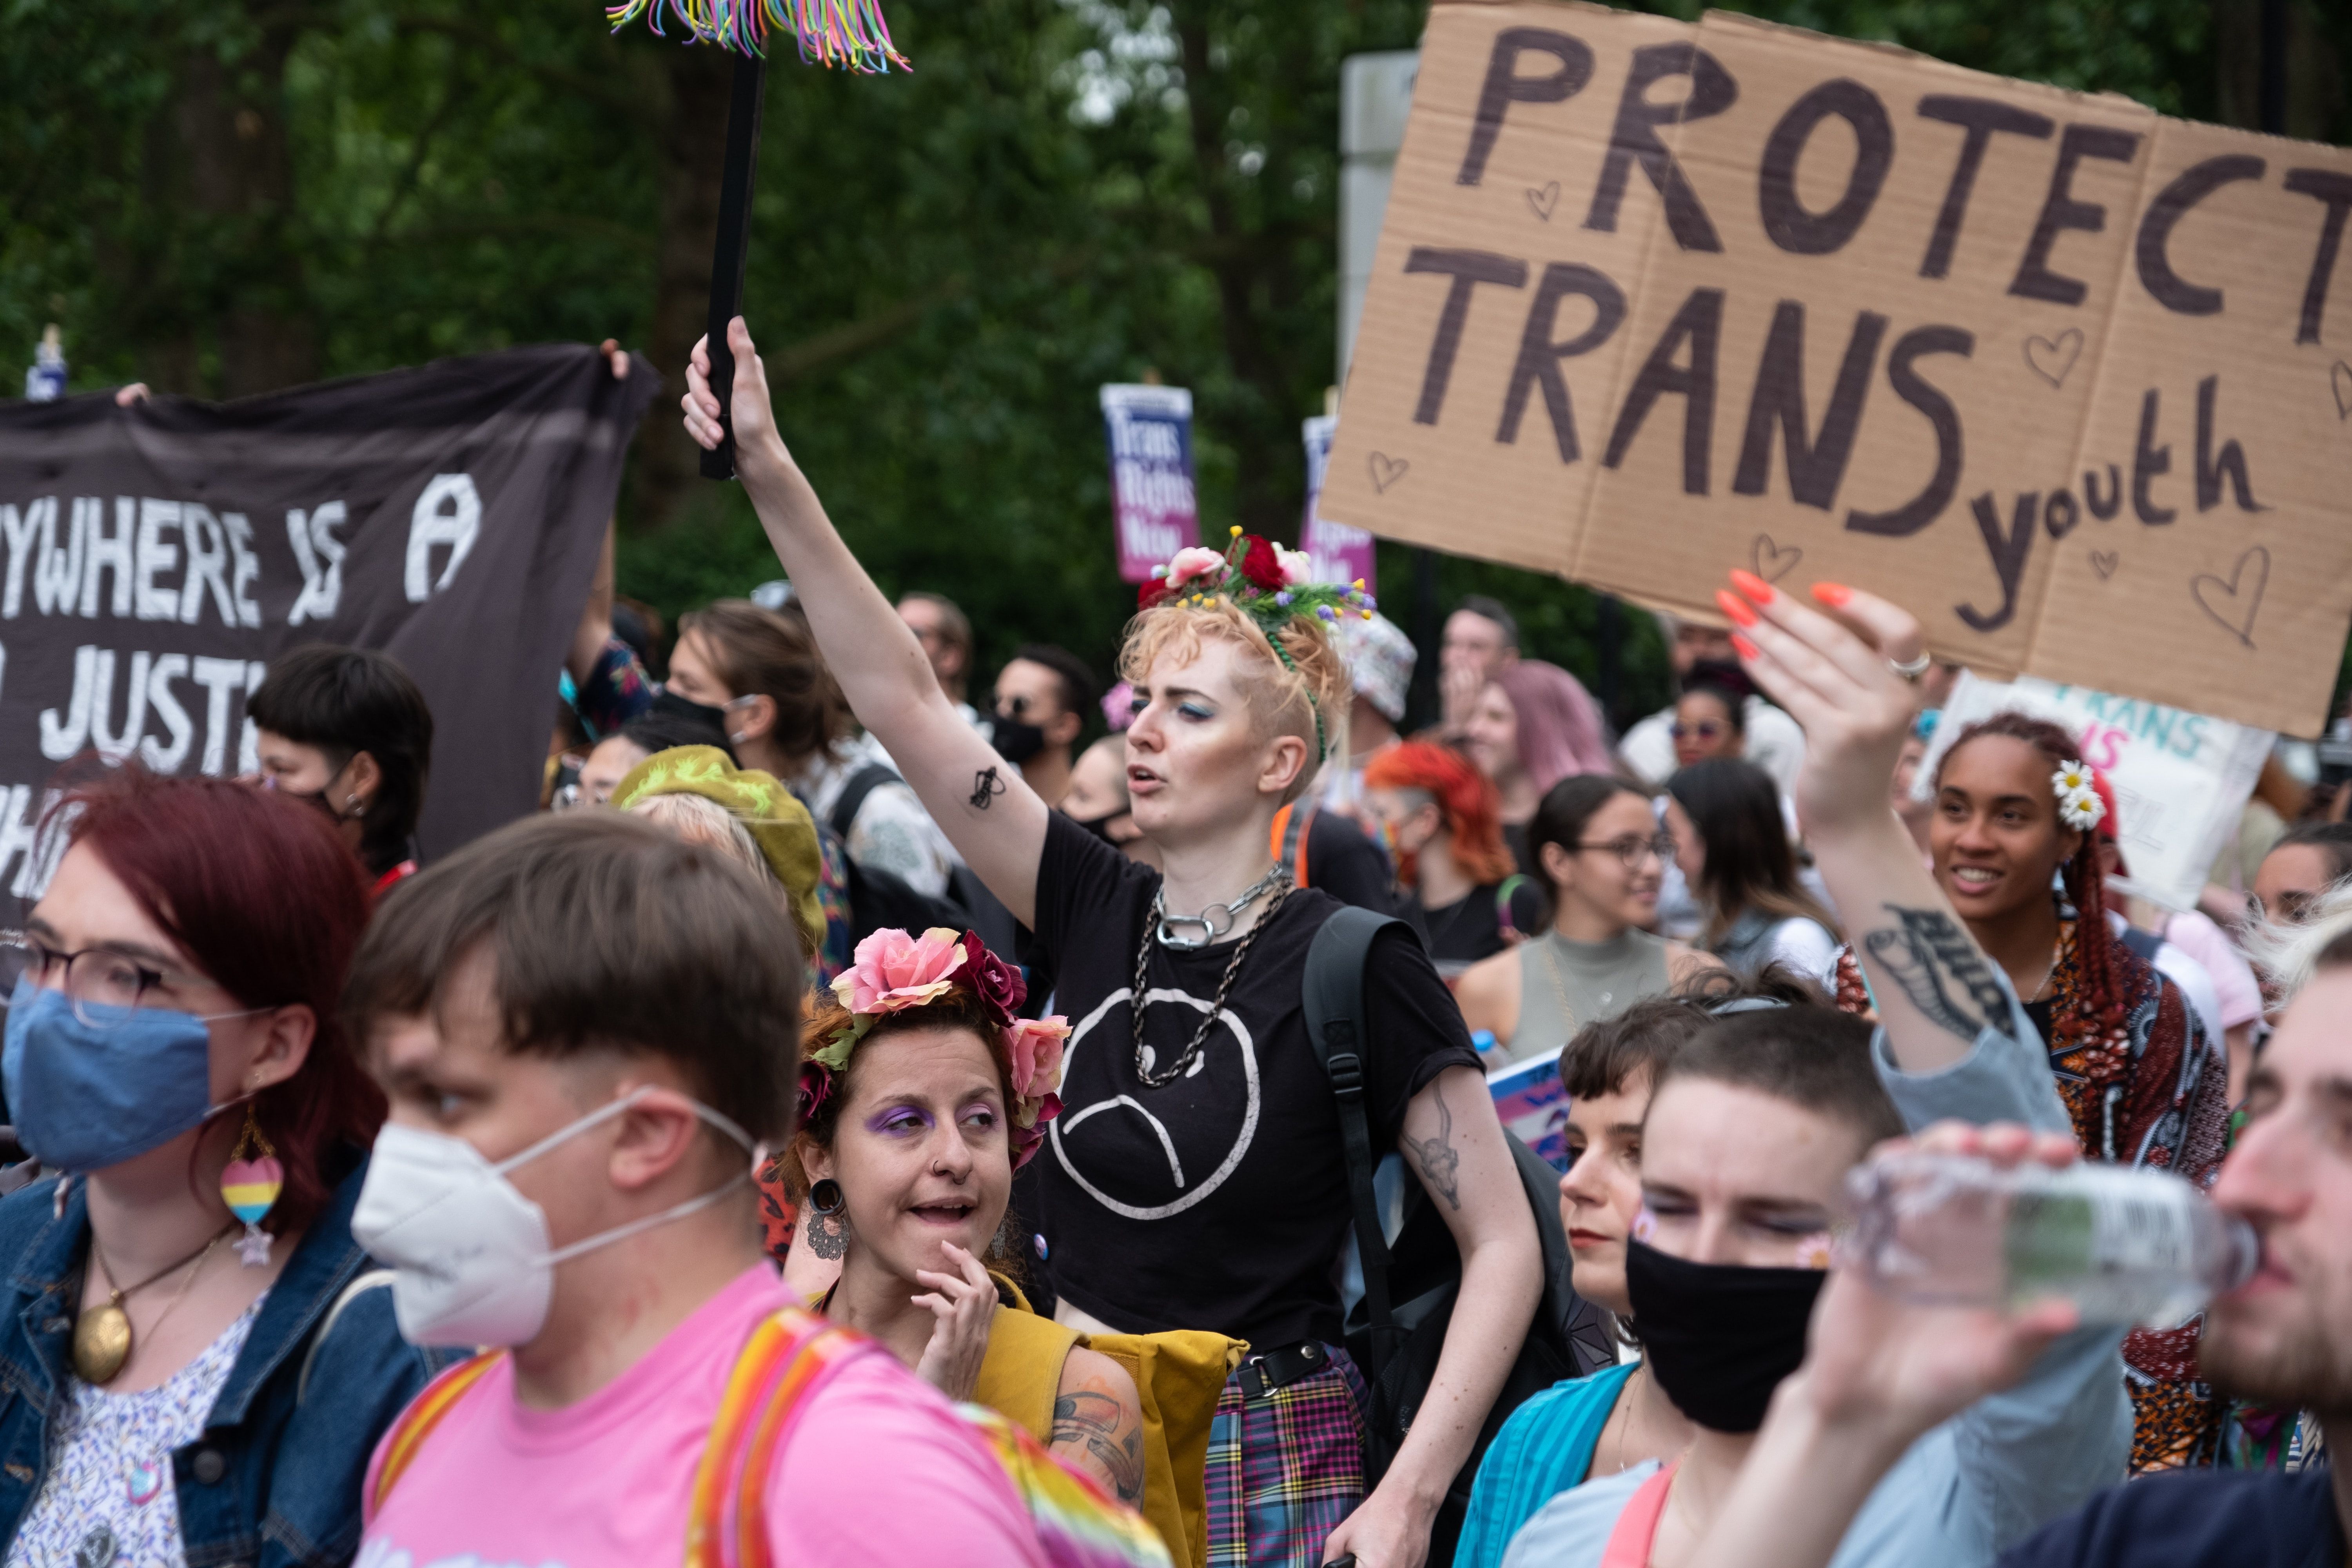 TRANS RIGHTS: No one can be left behind when it comes to human rights